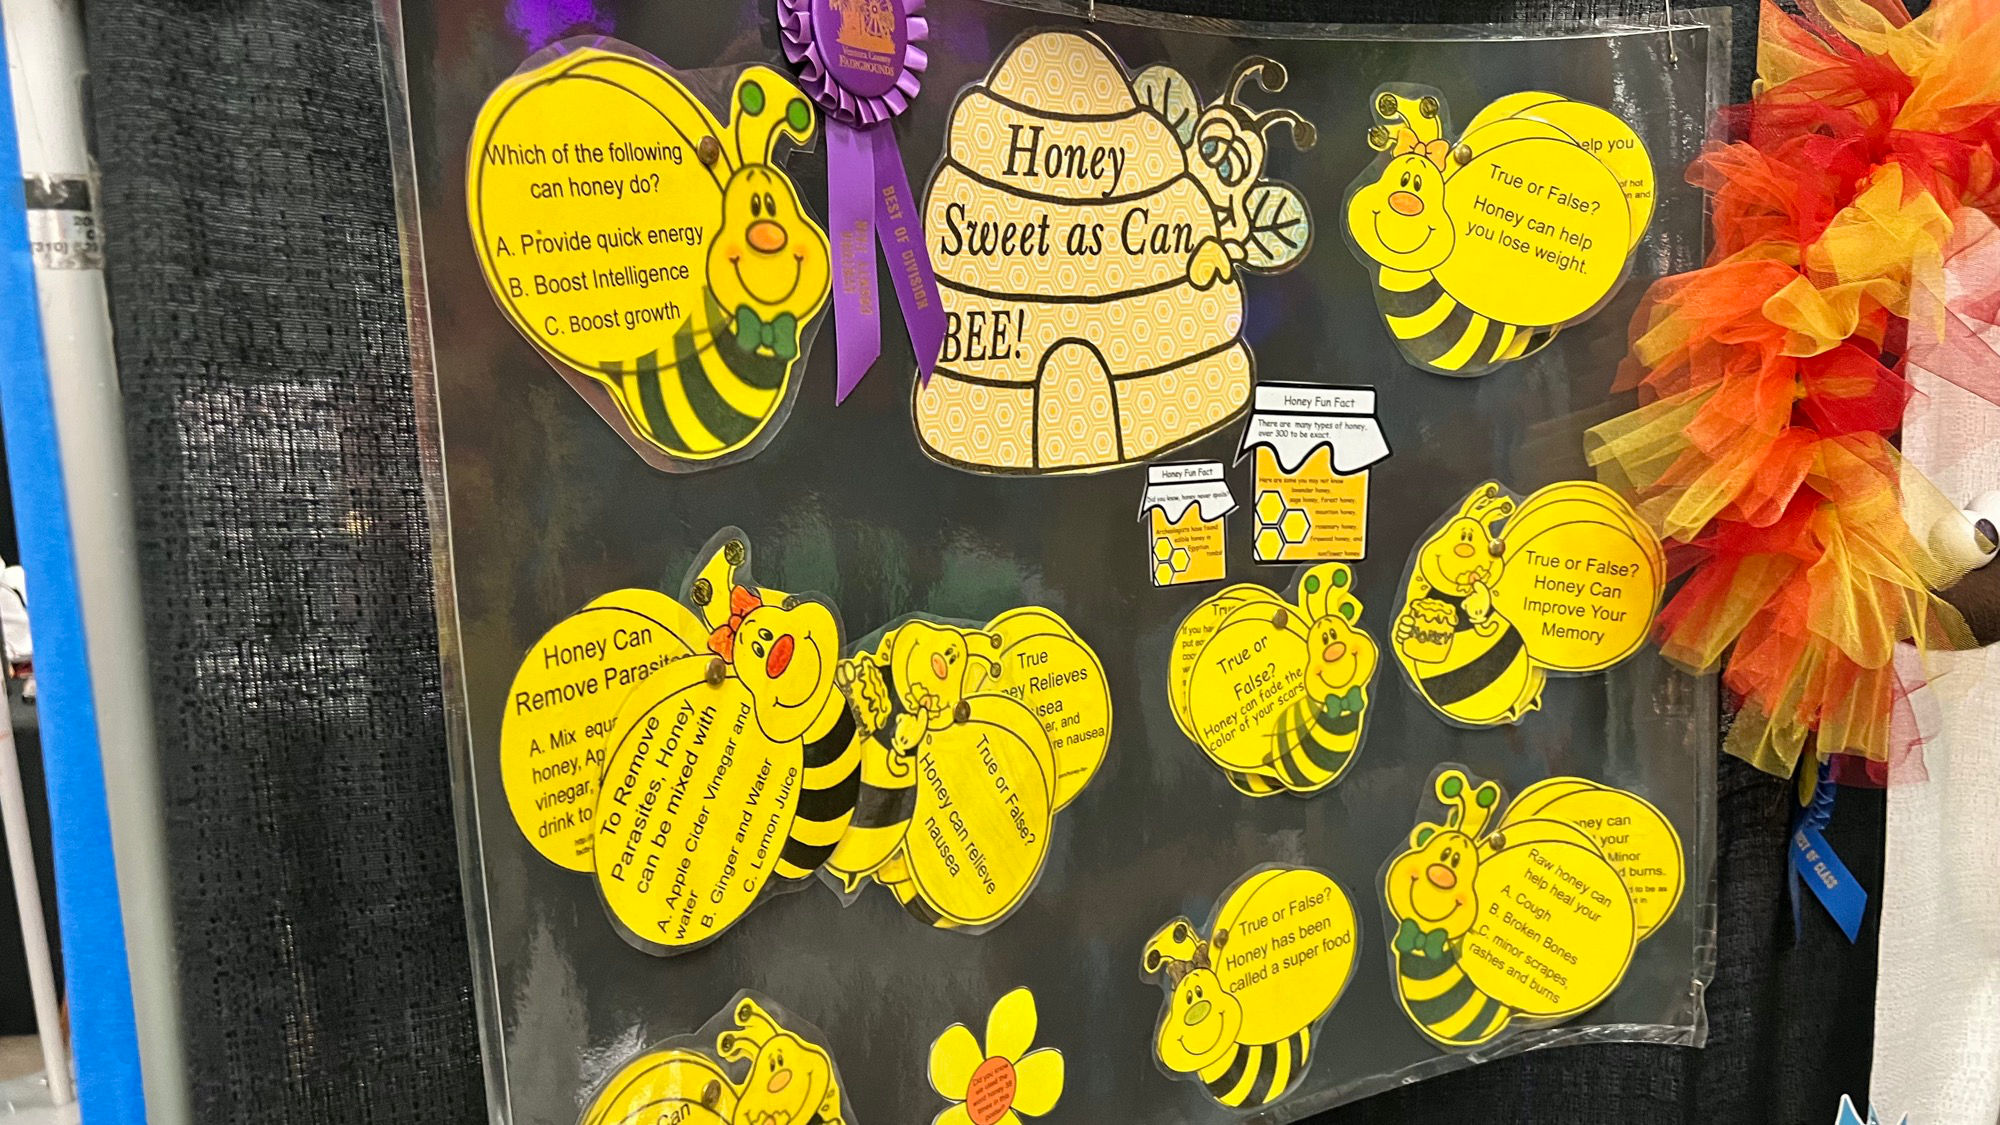 Ventura County 4H Honey Sweet as can BEE